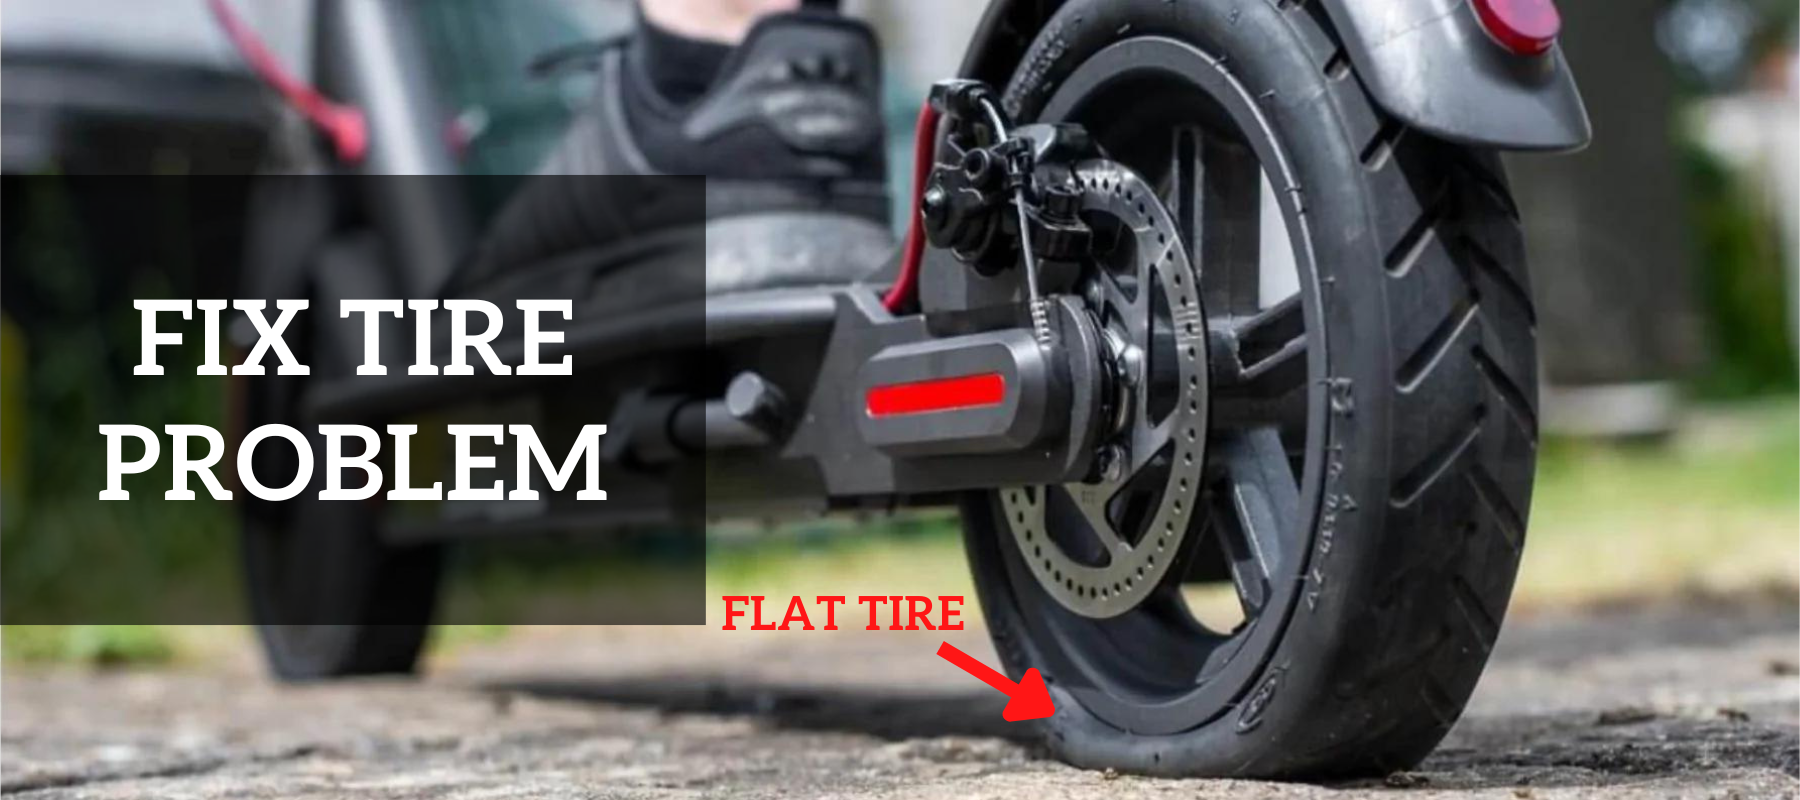 How to Fix Tire Problem of an Electric Scooter